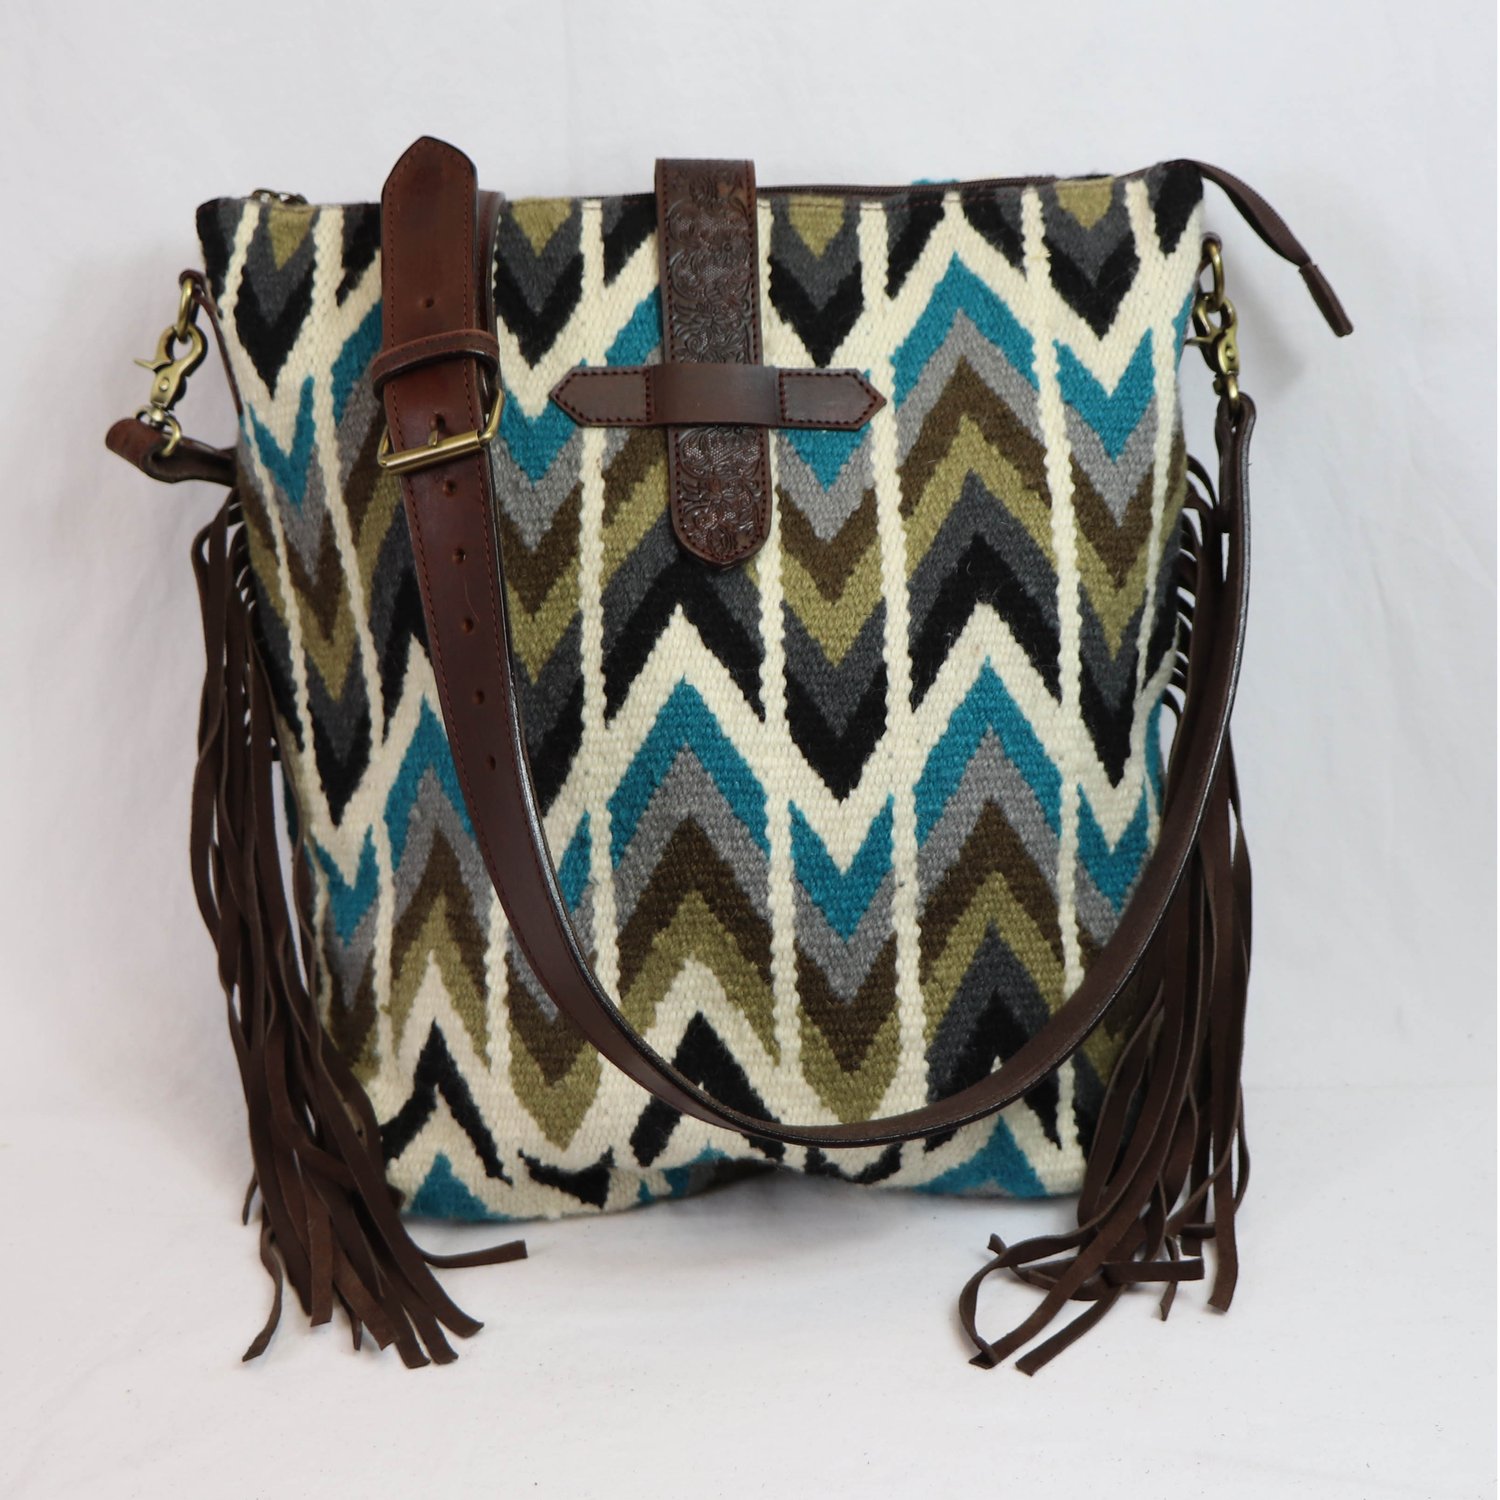 Beaded Leather Fringed Handcrafted Western Bag